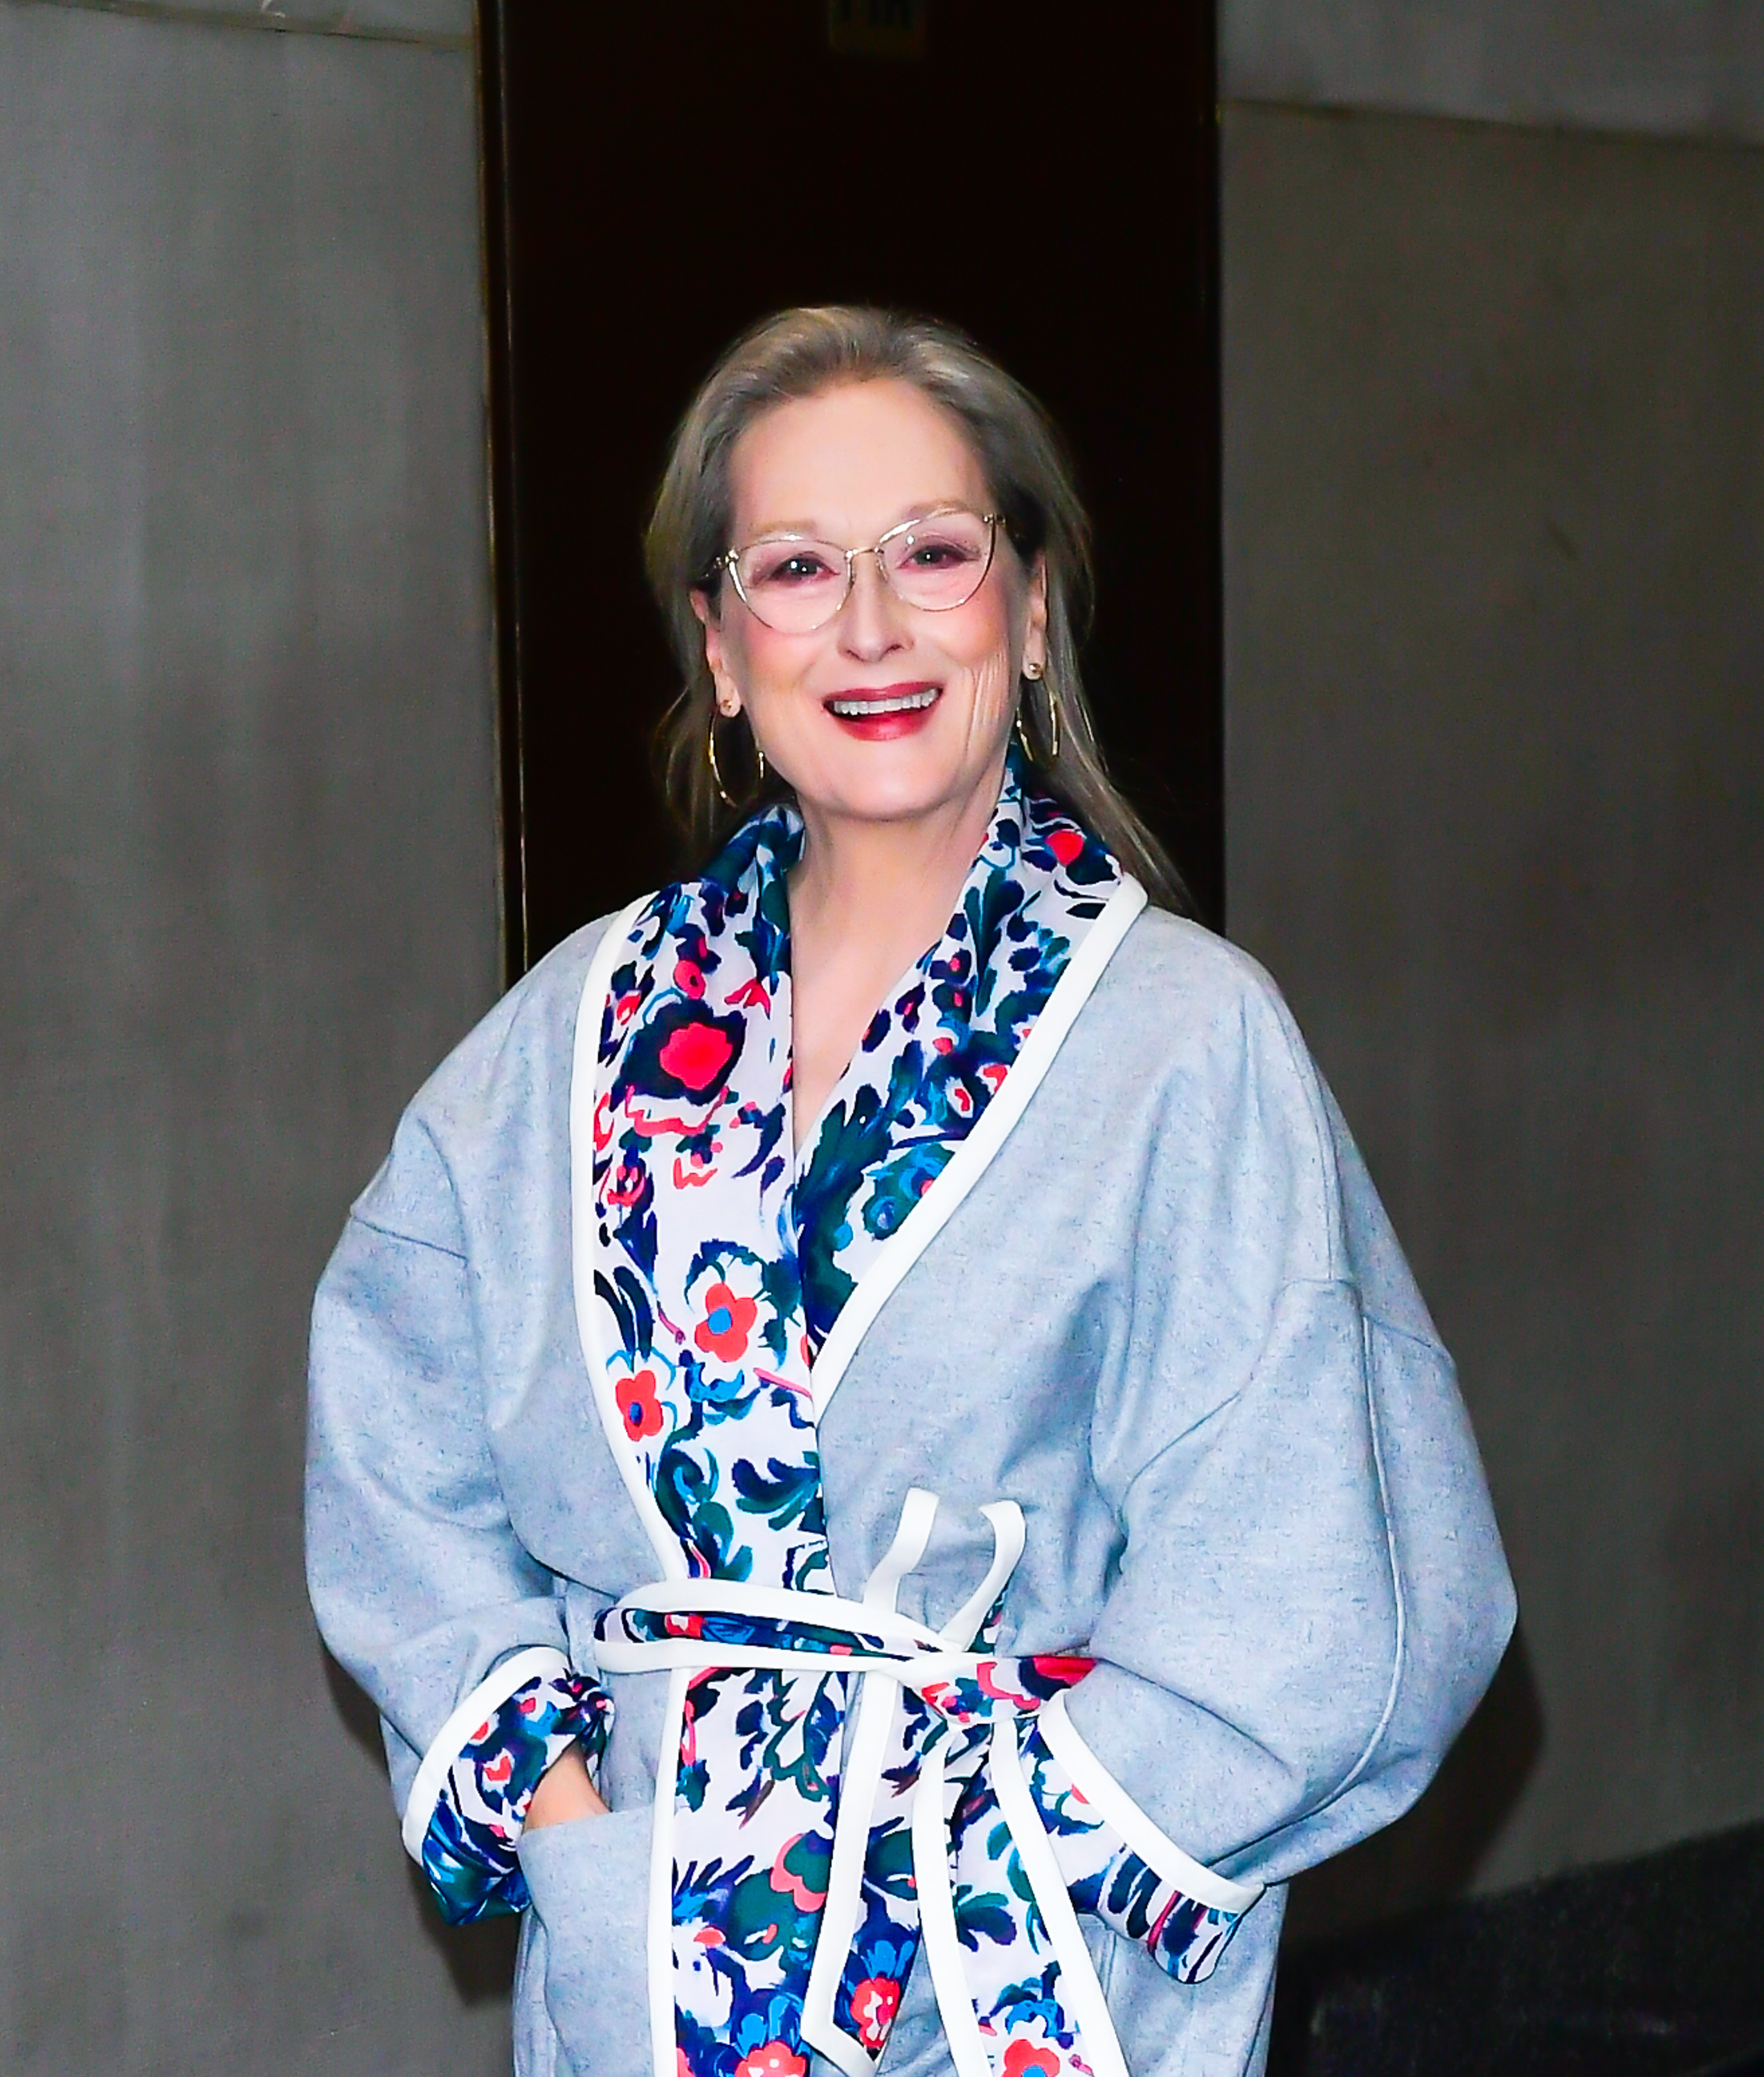 Meryl Streep am 7. Dezember 2021 in New York City | Quelle: Getty Images